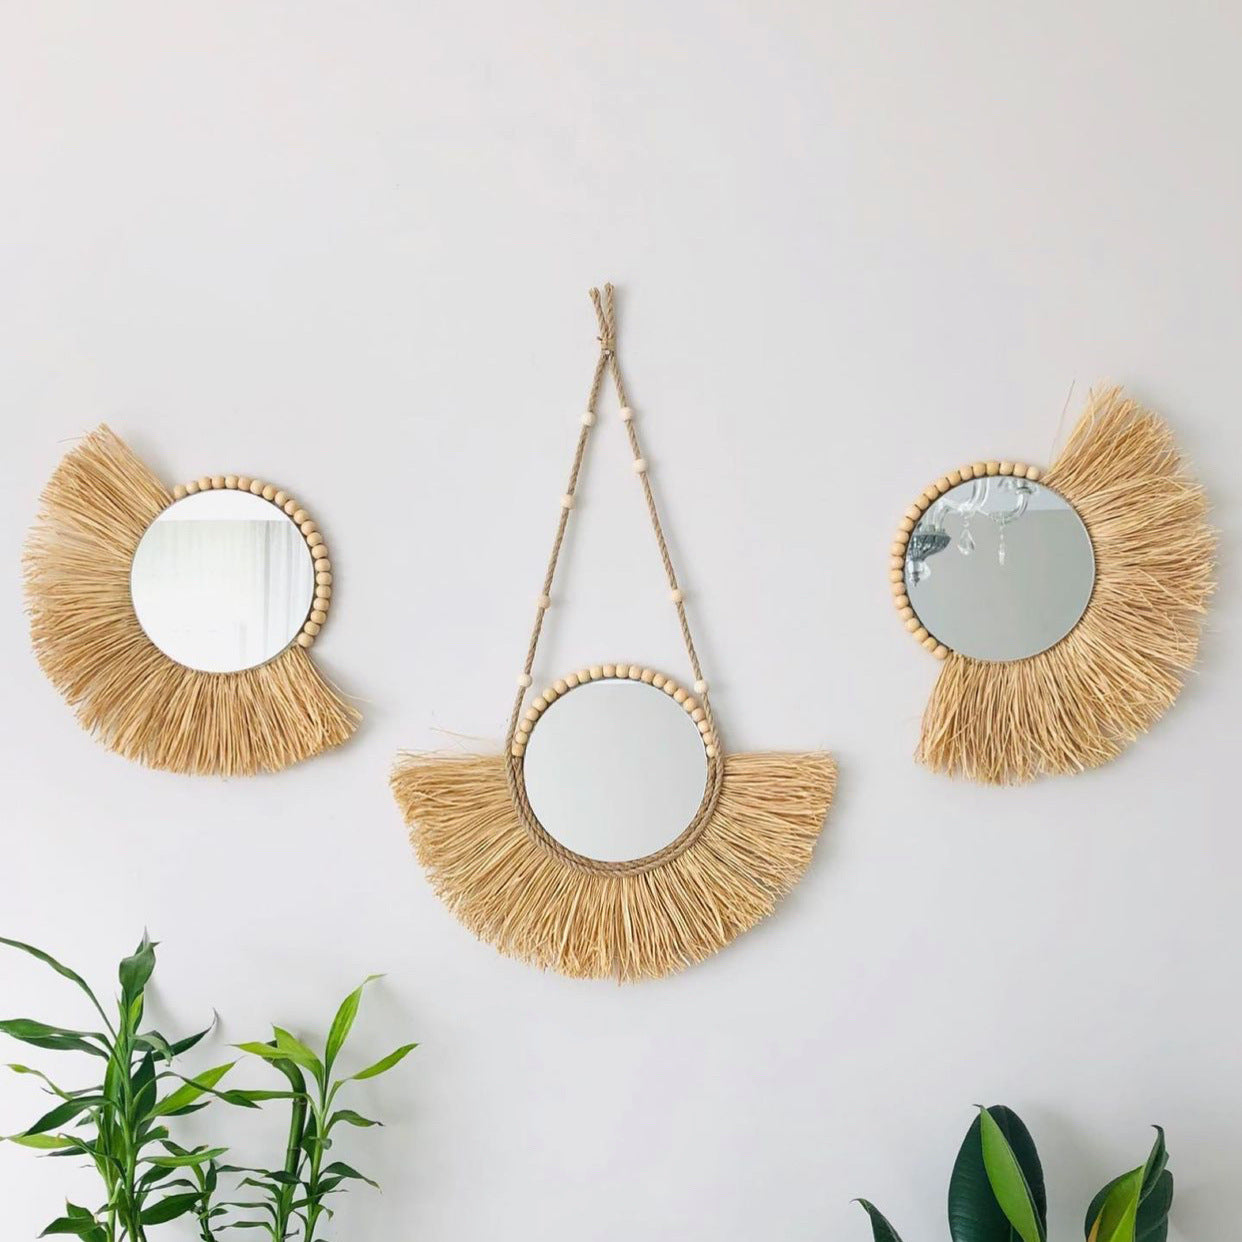 Wooden Bead And Straw Woven Mirror Background Wall Decoration Ornaments